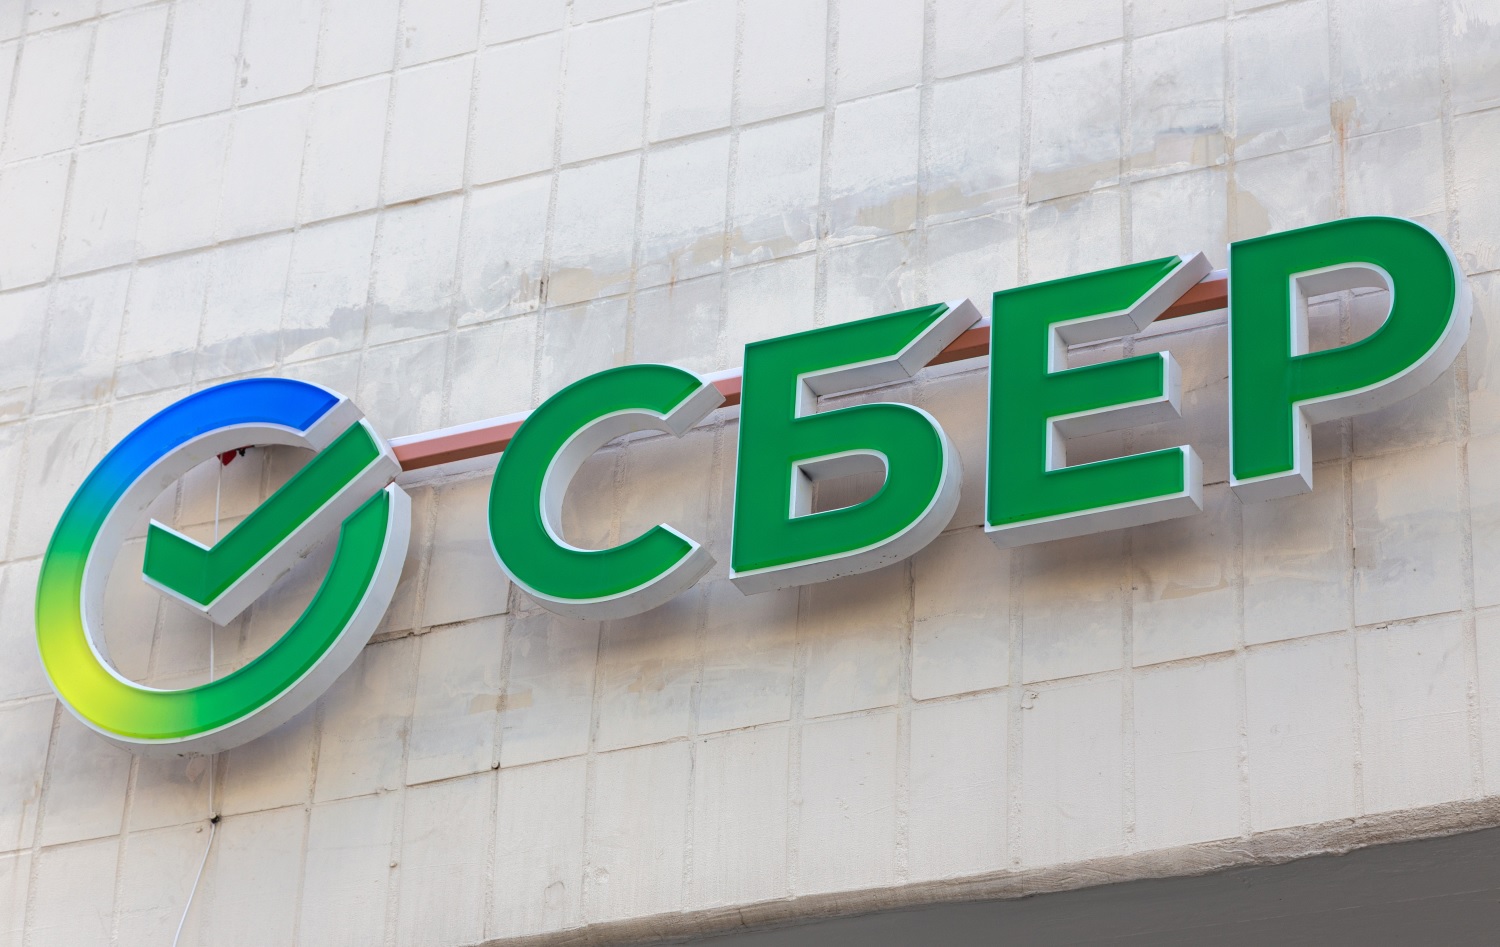 The Sber logo on a Russian building.